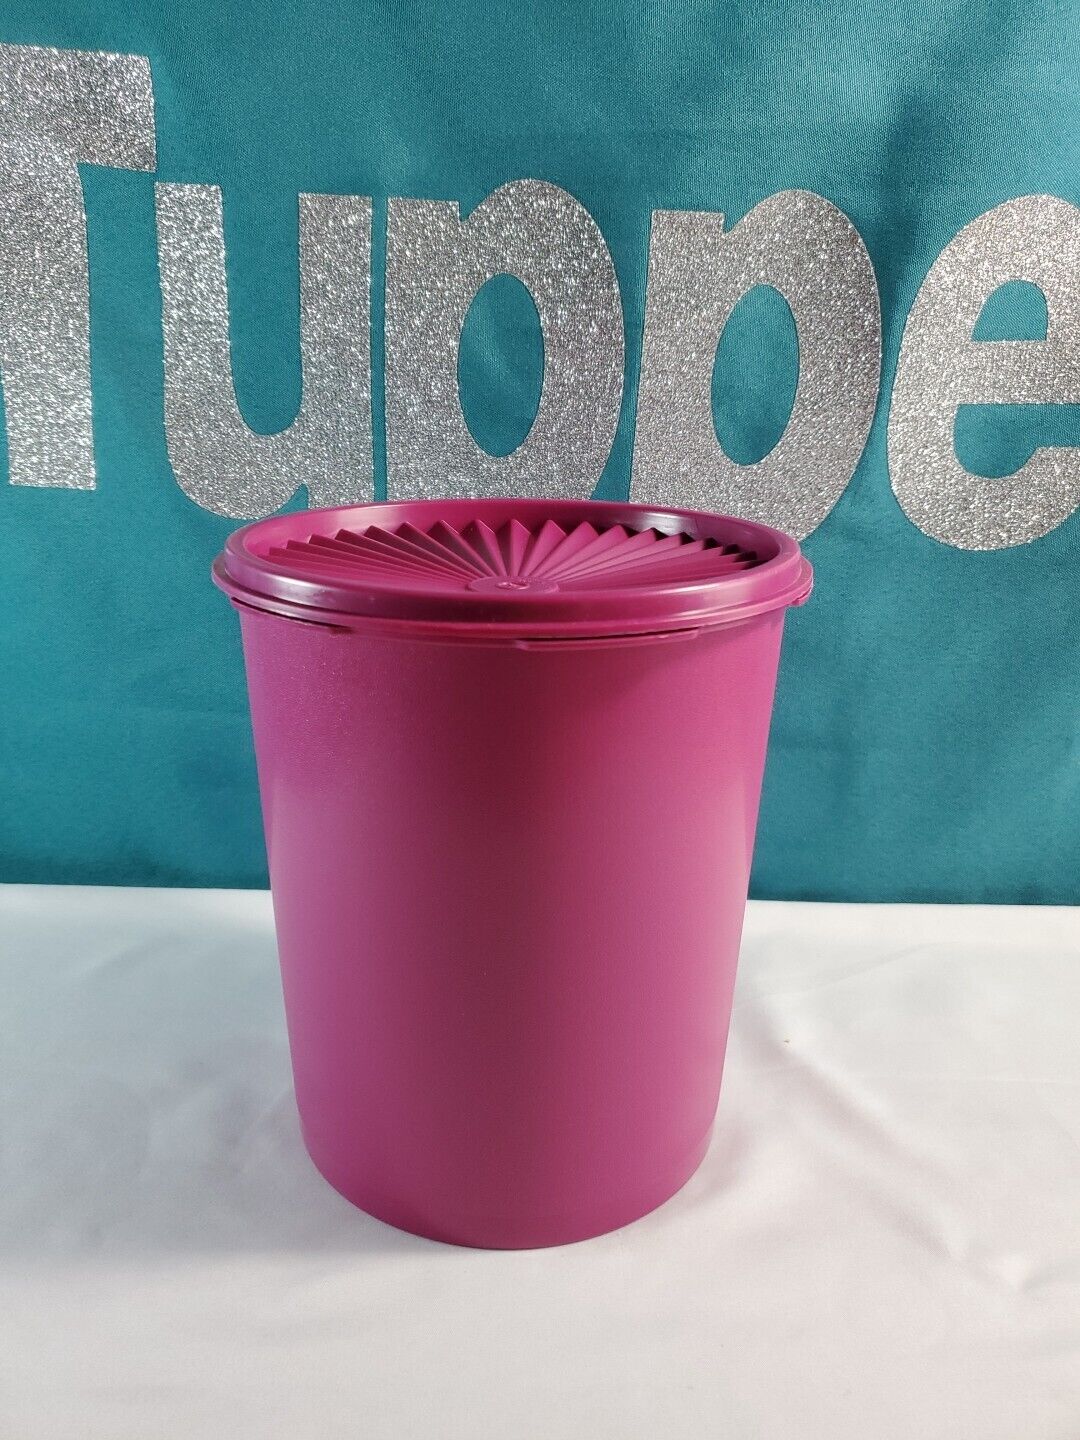 Tupperware Servalier Canister 2.7L / 11.50 cup Deep Pink Canister New